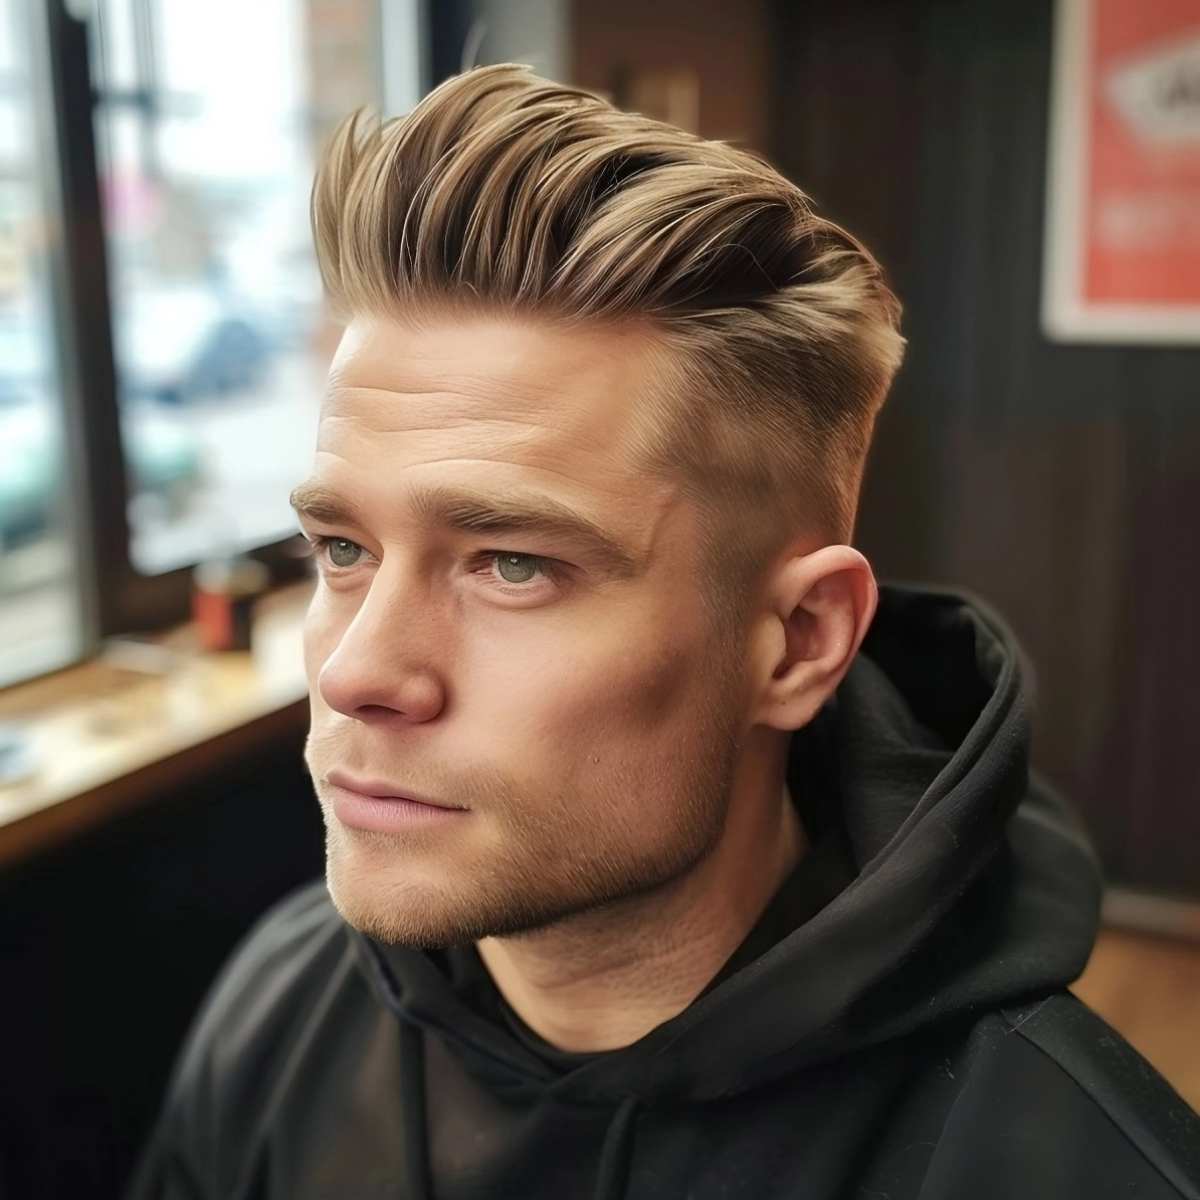 35 Cool Pompadour Haircut Styles For Men in 2023 | Mens hairstyles  undercut, Pompadour fade haircut, Undercut hairstyles